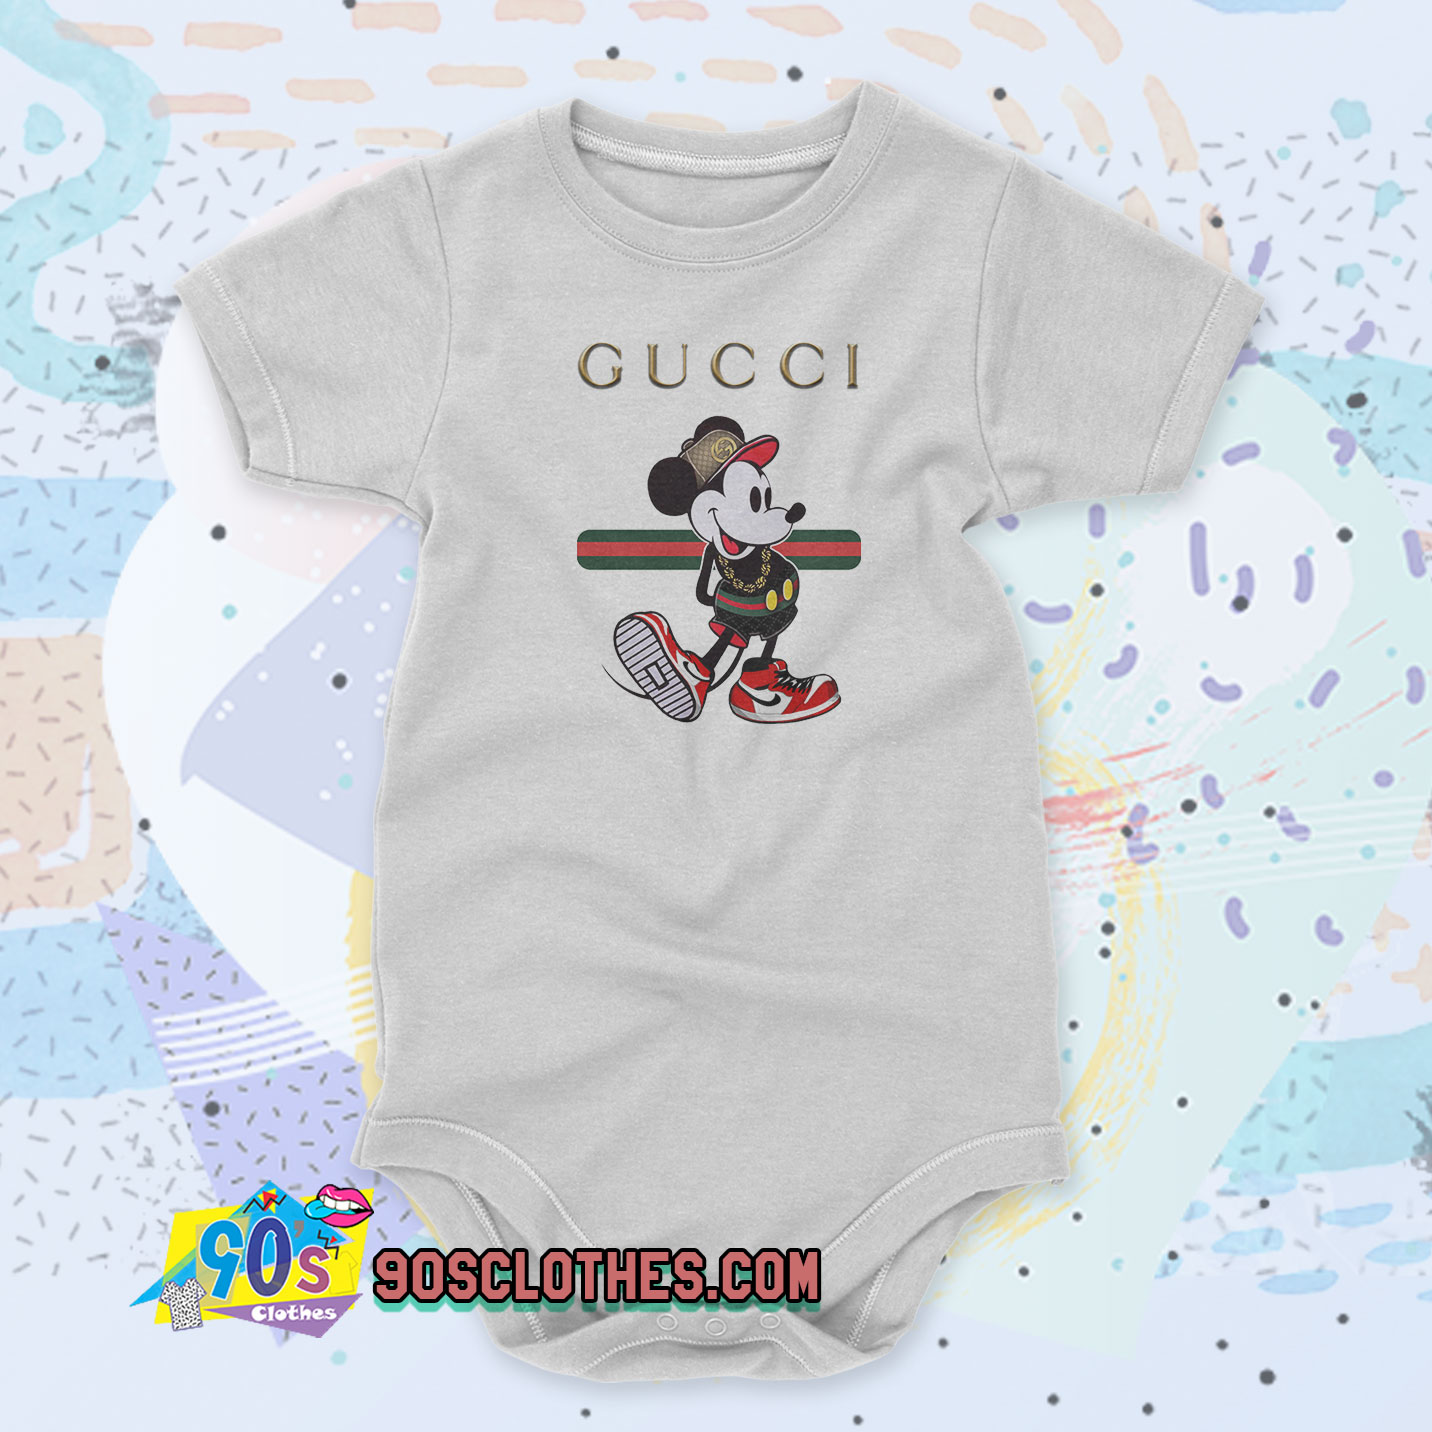 stof in de ogen gooien produceren Klooster Mickey Mouse Gucci Stripe Baby Onesie, Baby Clothes - 90sclothes.com